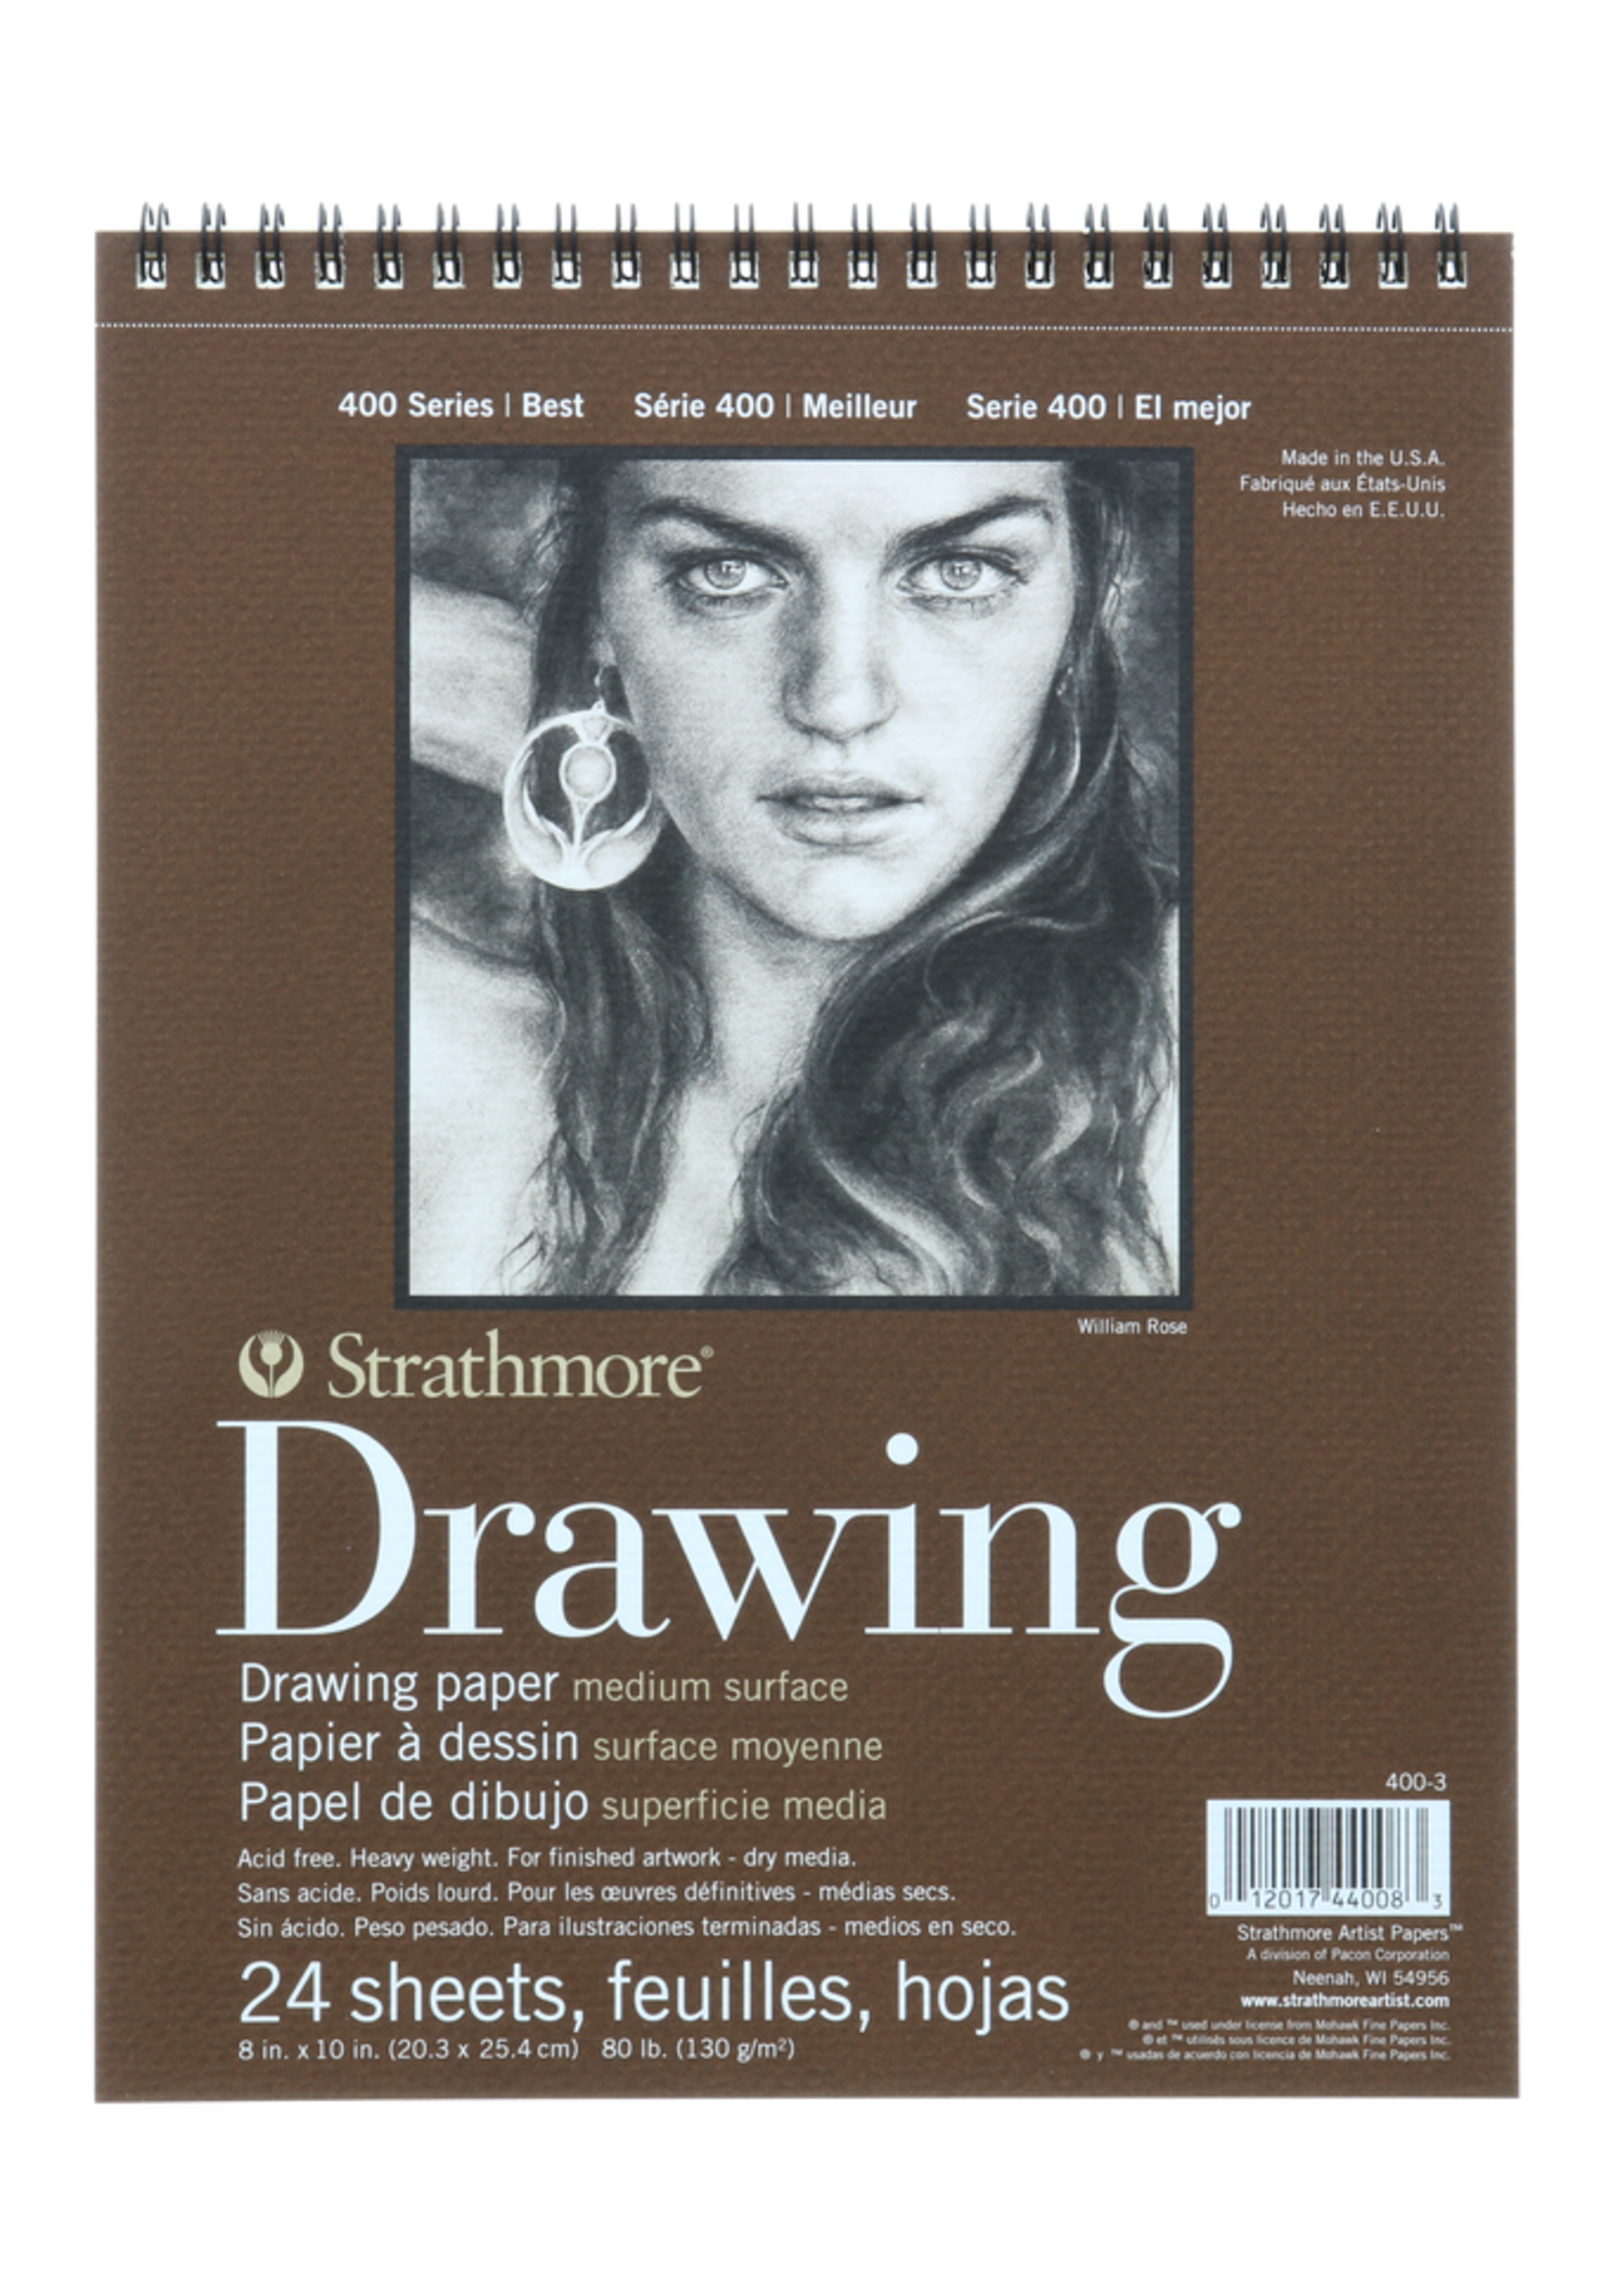 PACON/STRATHMORE DRAWING PAD 24 SHEETS